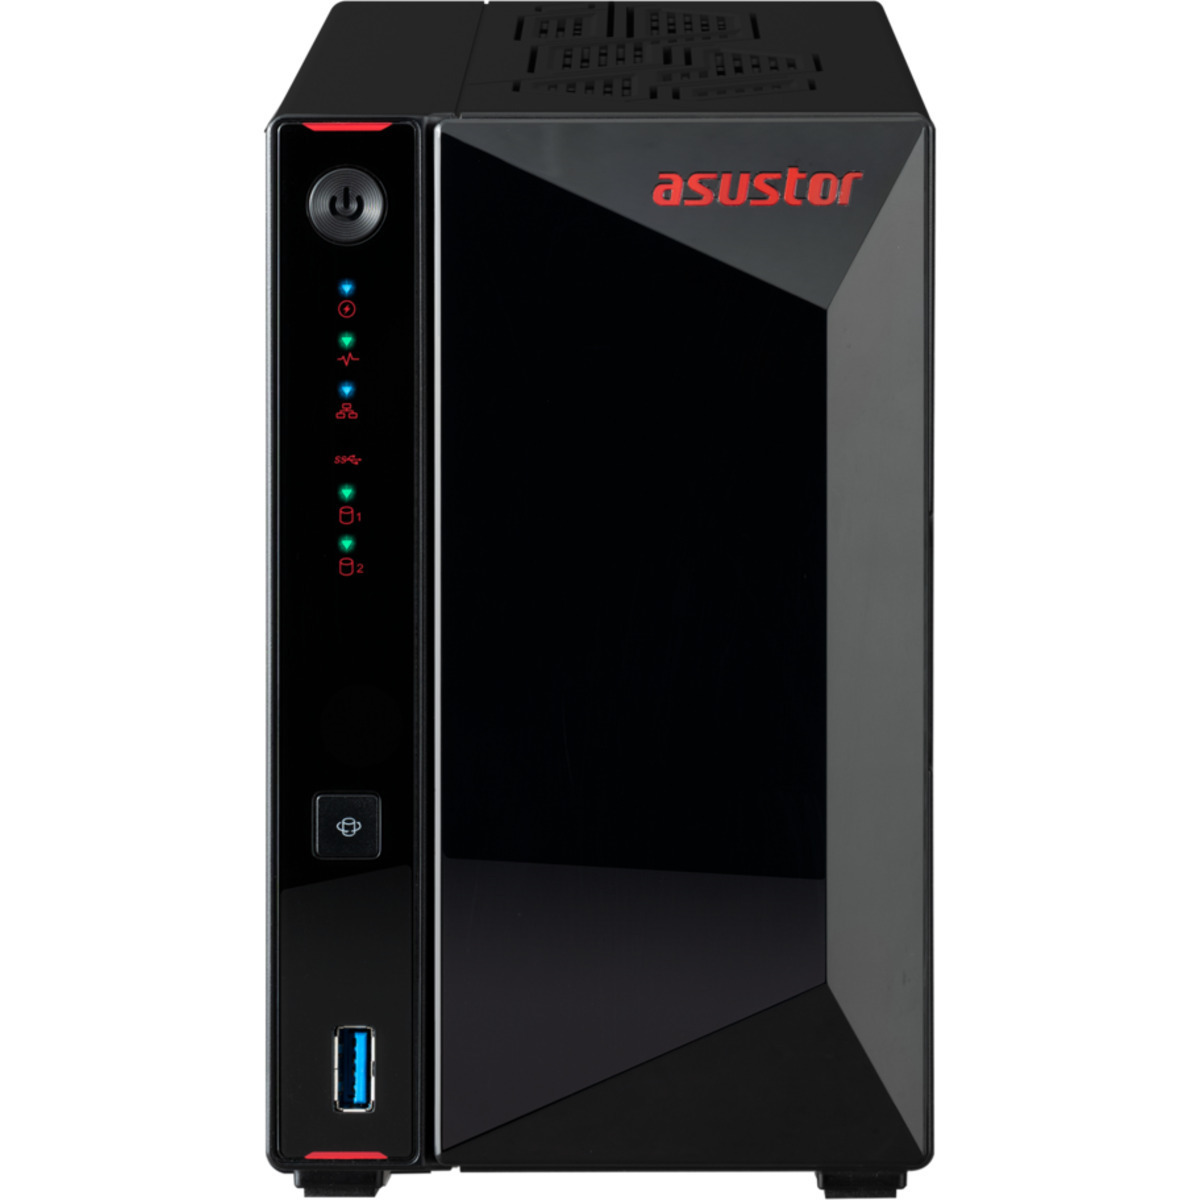 buy $1466 ASUSTOR Nimbustor 2 Gen2 AS5402T 40tb Desktop NAS - Network Attached Storage Device 2x20000gb Western Digital Red Pro WD201KFGX 3.5 7200rpm SATA 6Gb/s HDD NAS Class Drives Installed - Burn-In Tested - FREE RAM UPGRADE - nas headquarters buy network attached storage server device das new raid-5 free shipping simply usa Nimbustor 2 Gen2 AS5402T